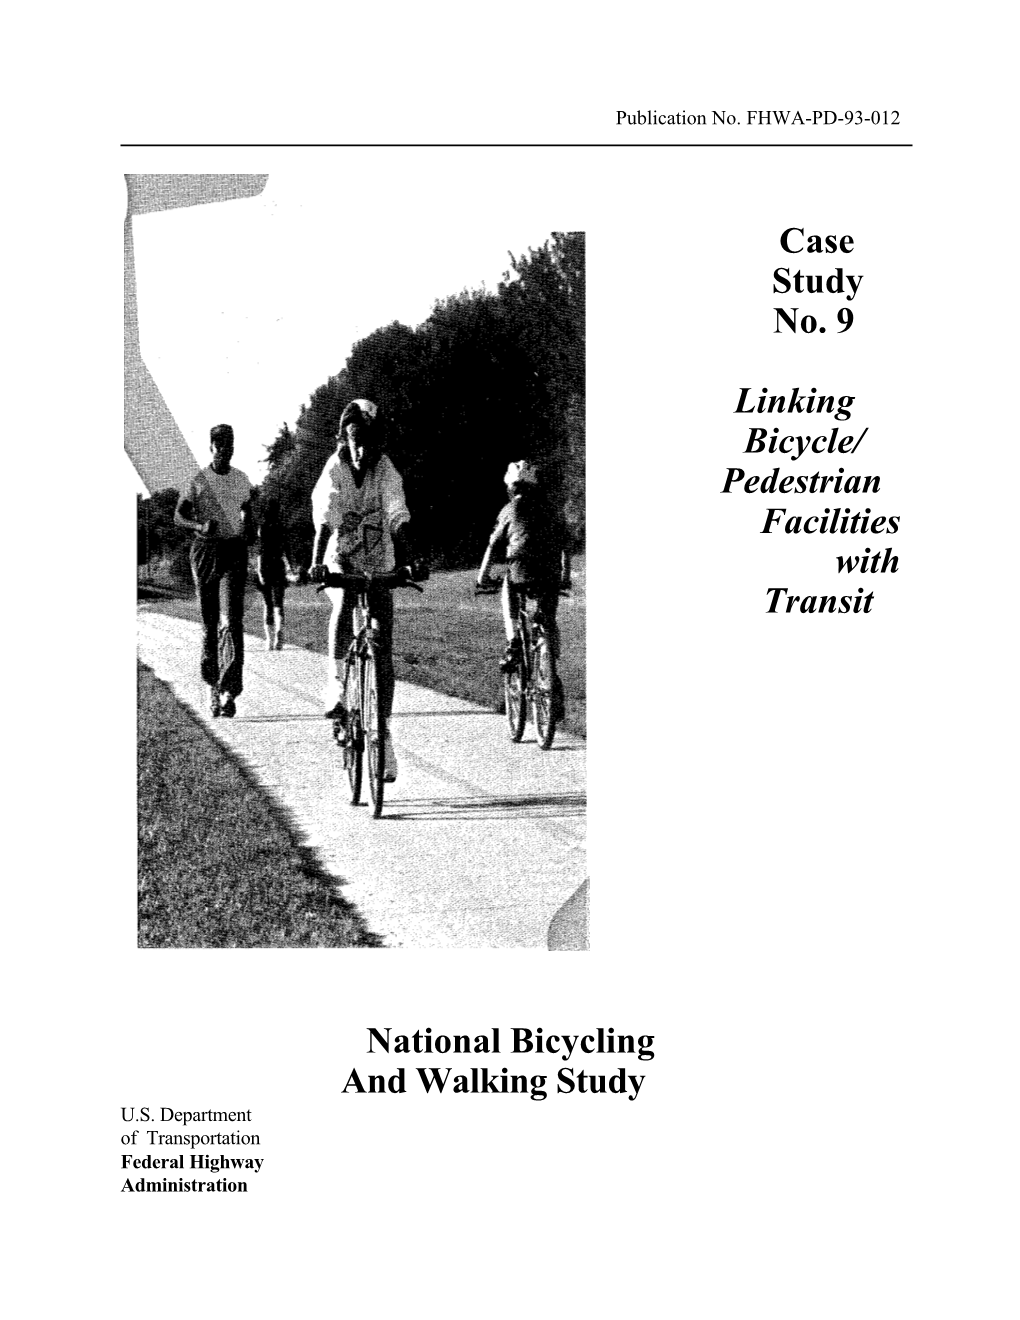 Linking Bicycle/Pedestrian Facilities with Transit